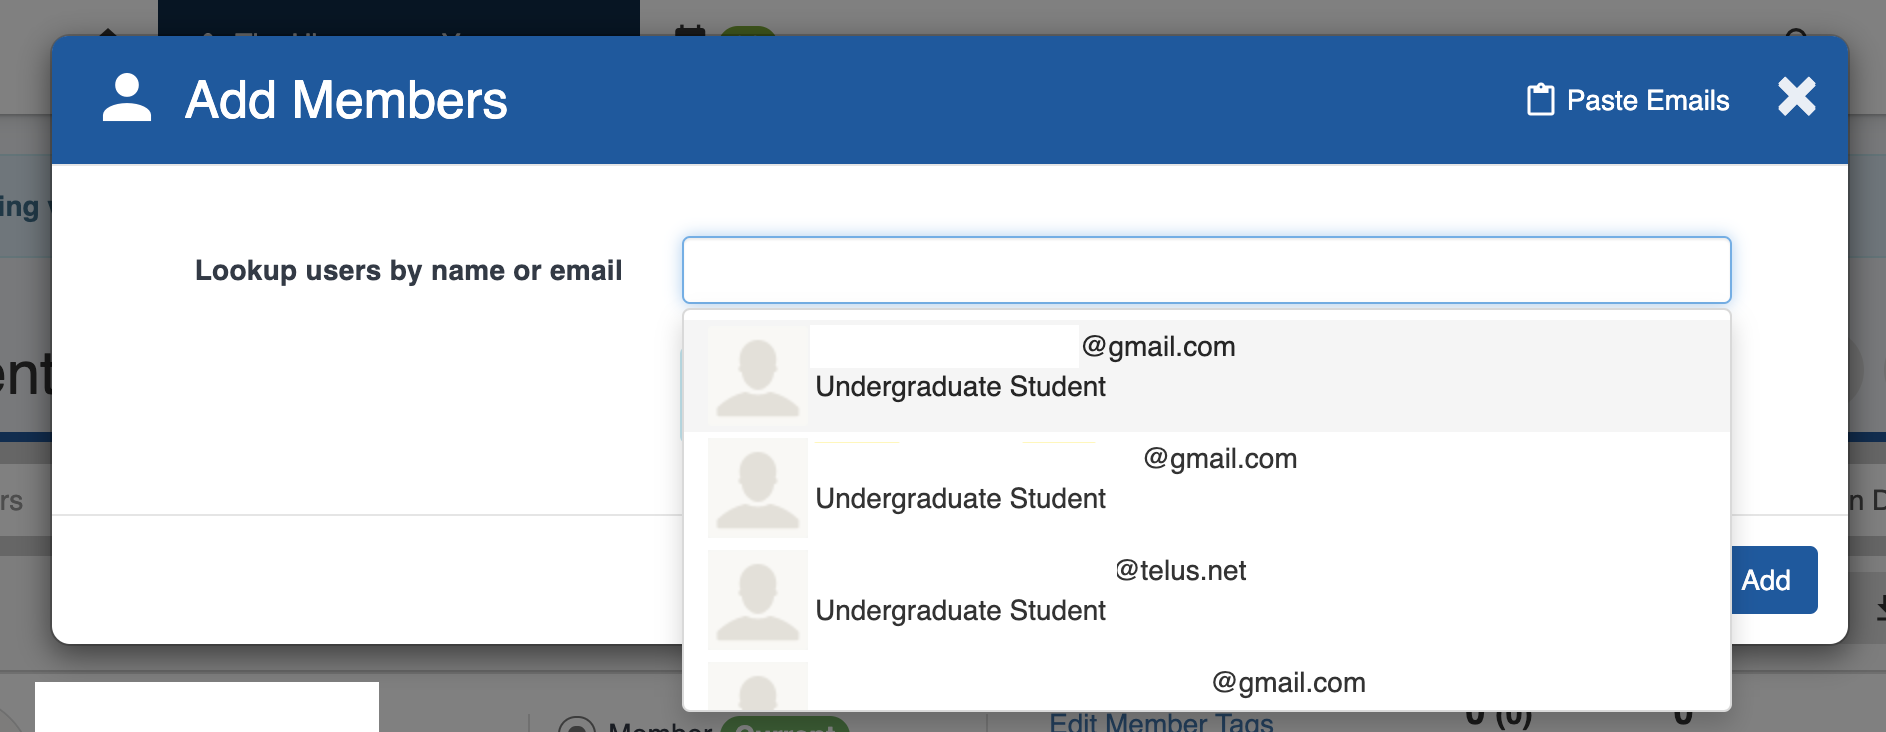 Personal email addresses were still visible on CampusBase.